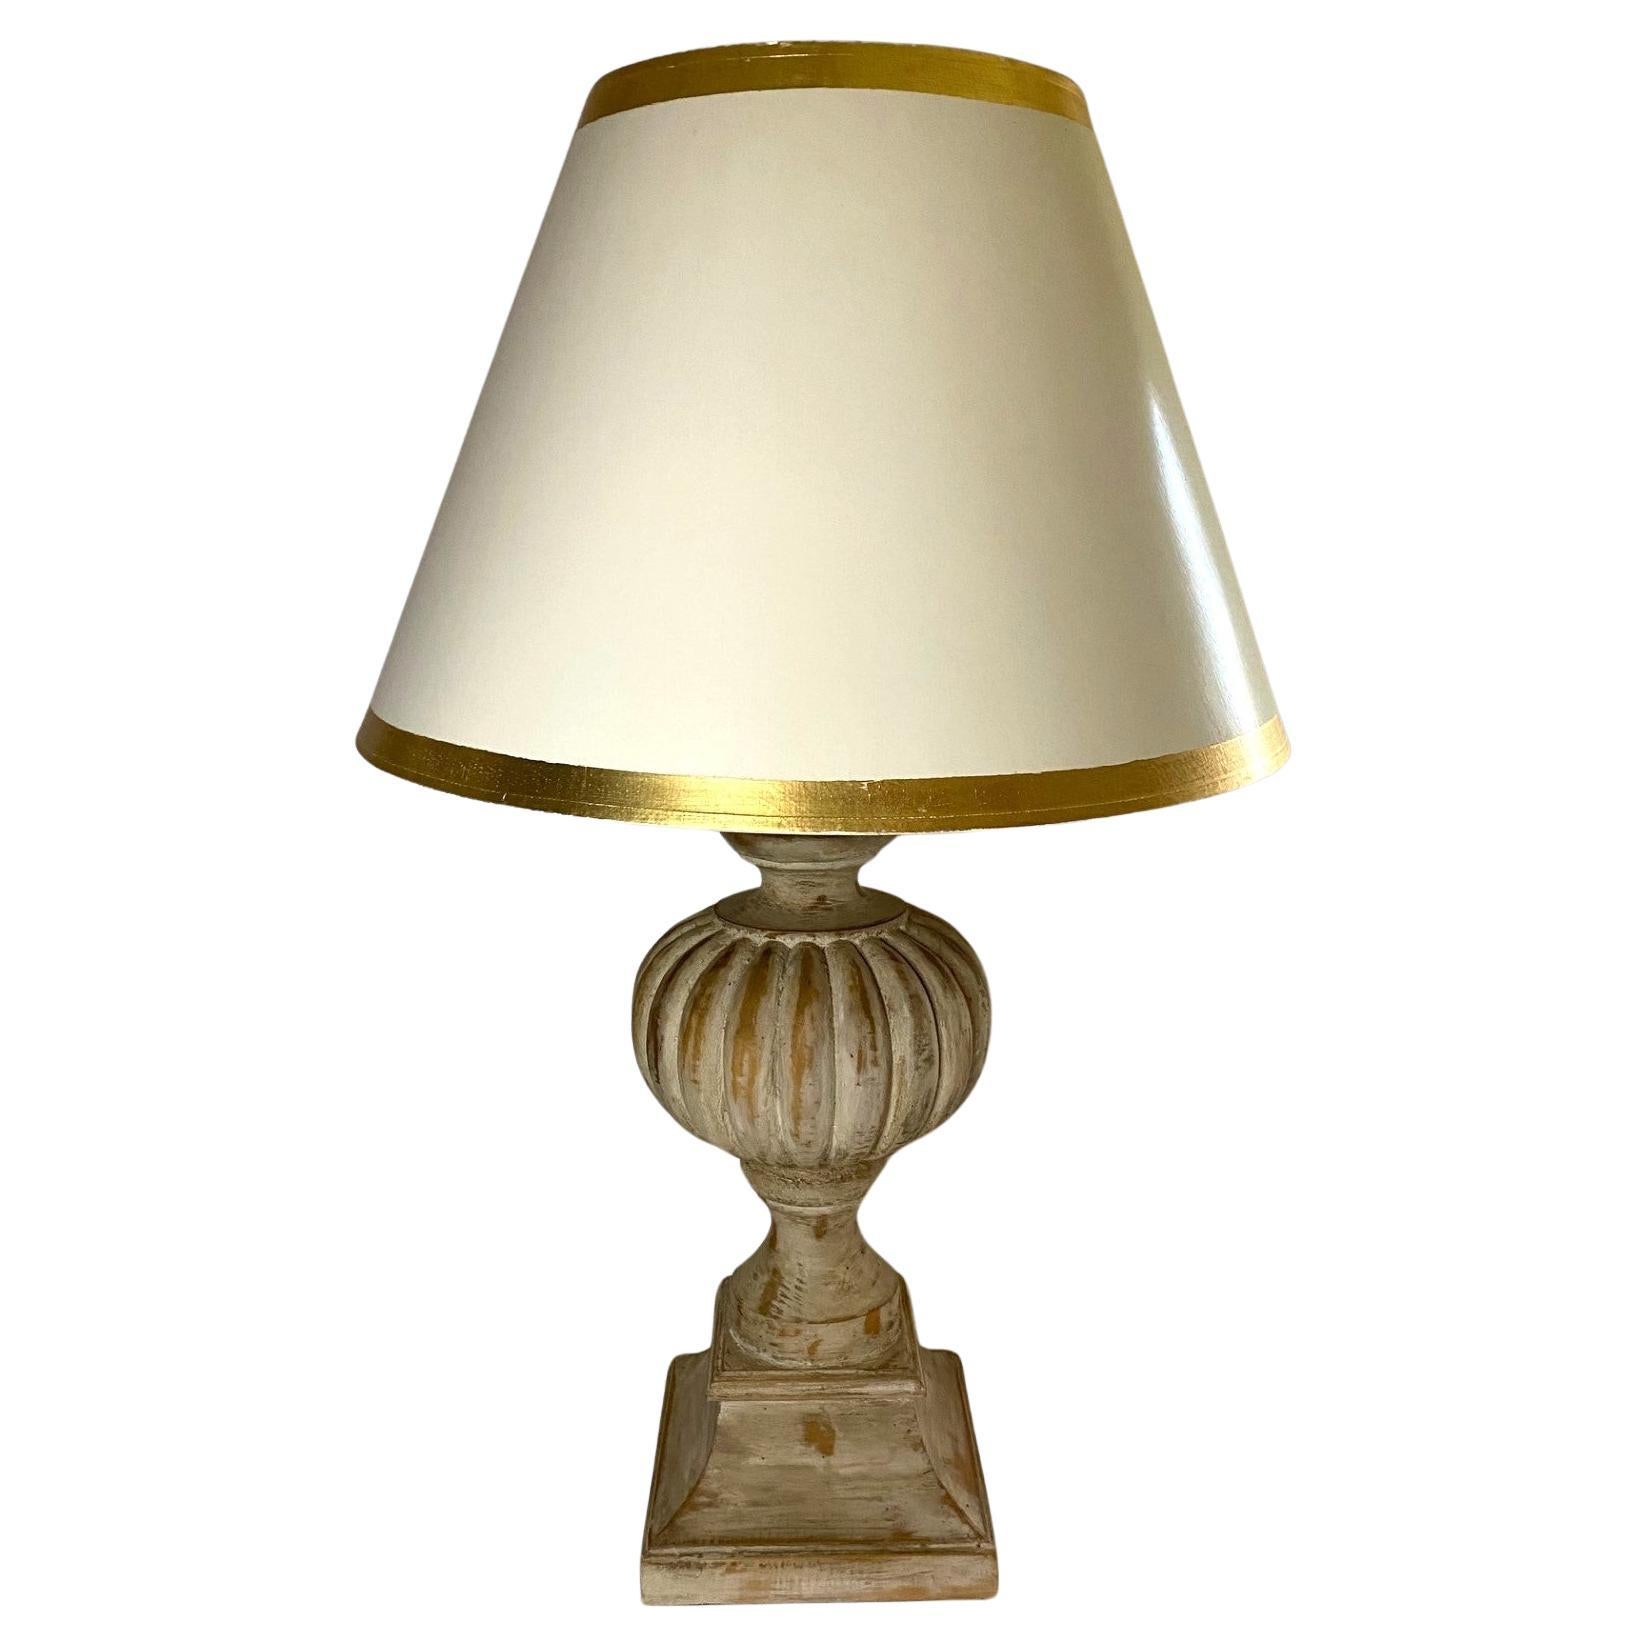 "Pumpkin" Table Lamp with Antique White Finish and Shade with Gilt Trim